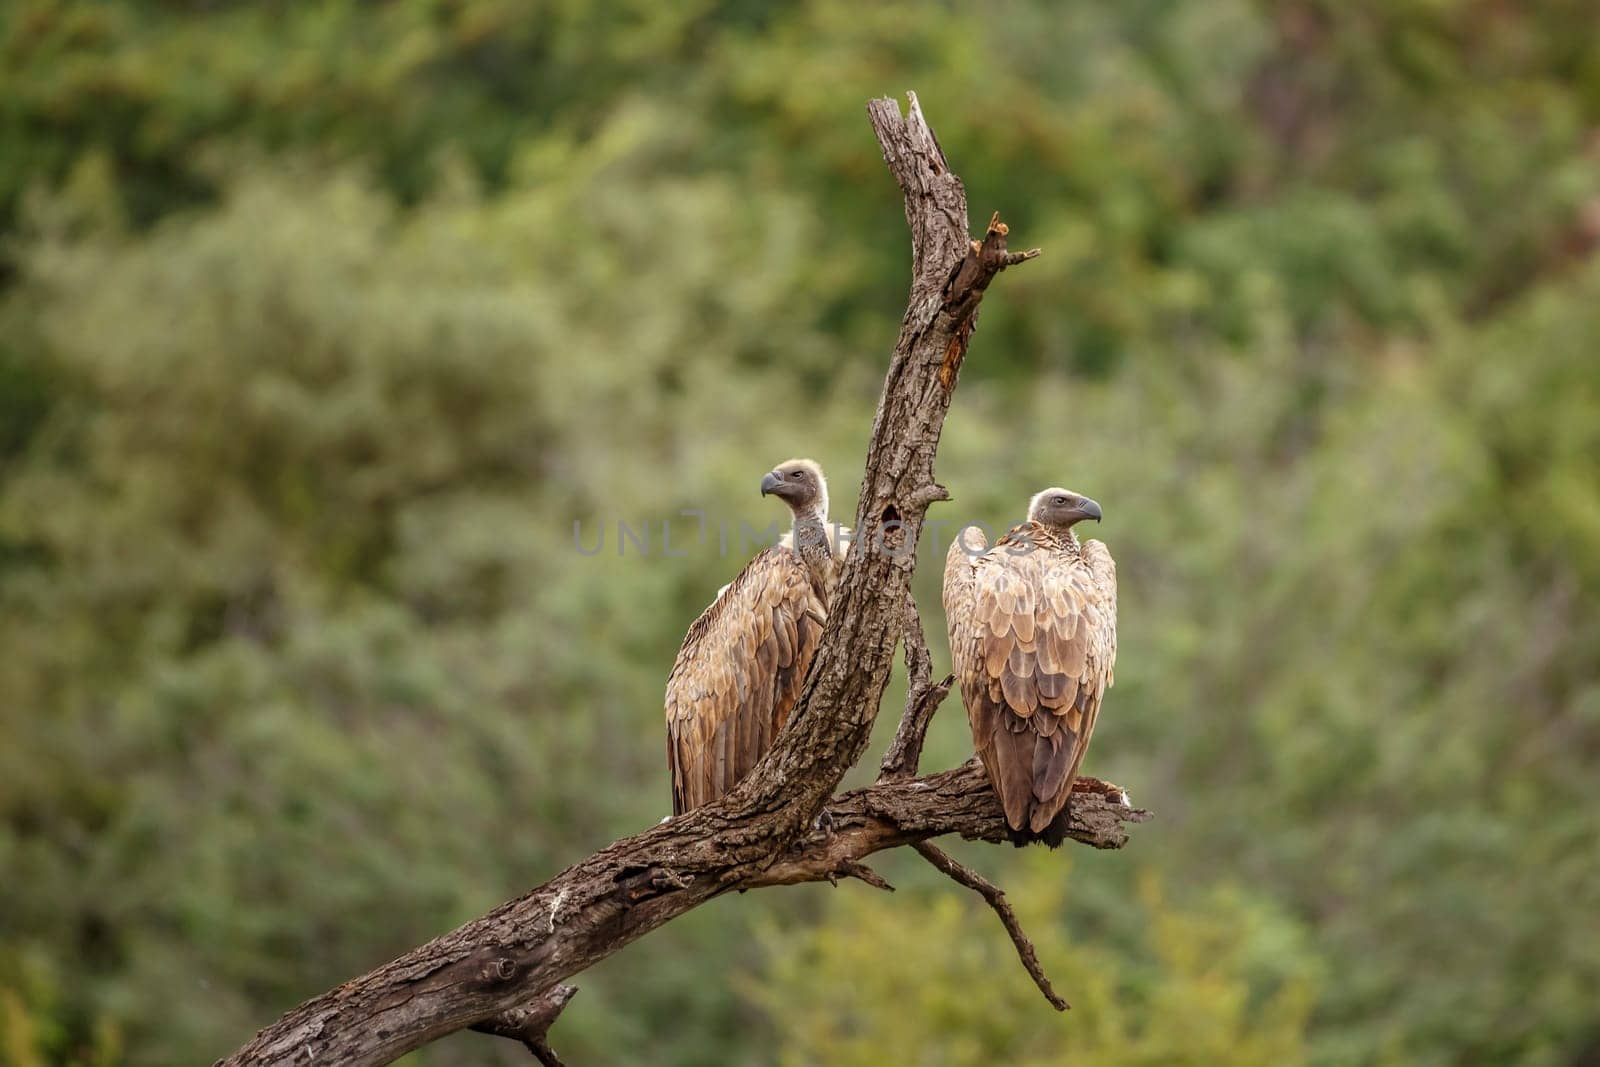 Two White backed Vulture standing on a log isolated in natural background in Kruger National park, South Africa ; Specie Gyps africanus family of Accipitridae